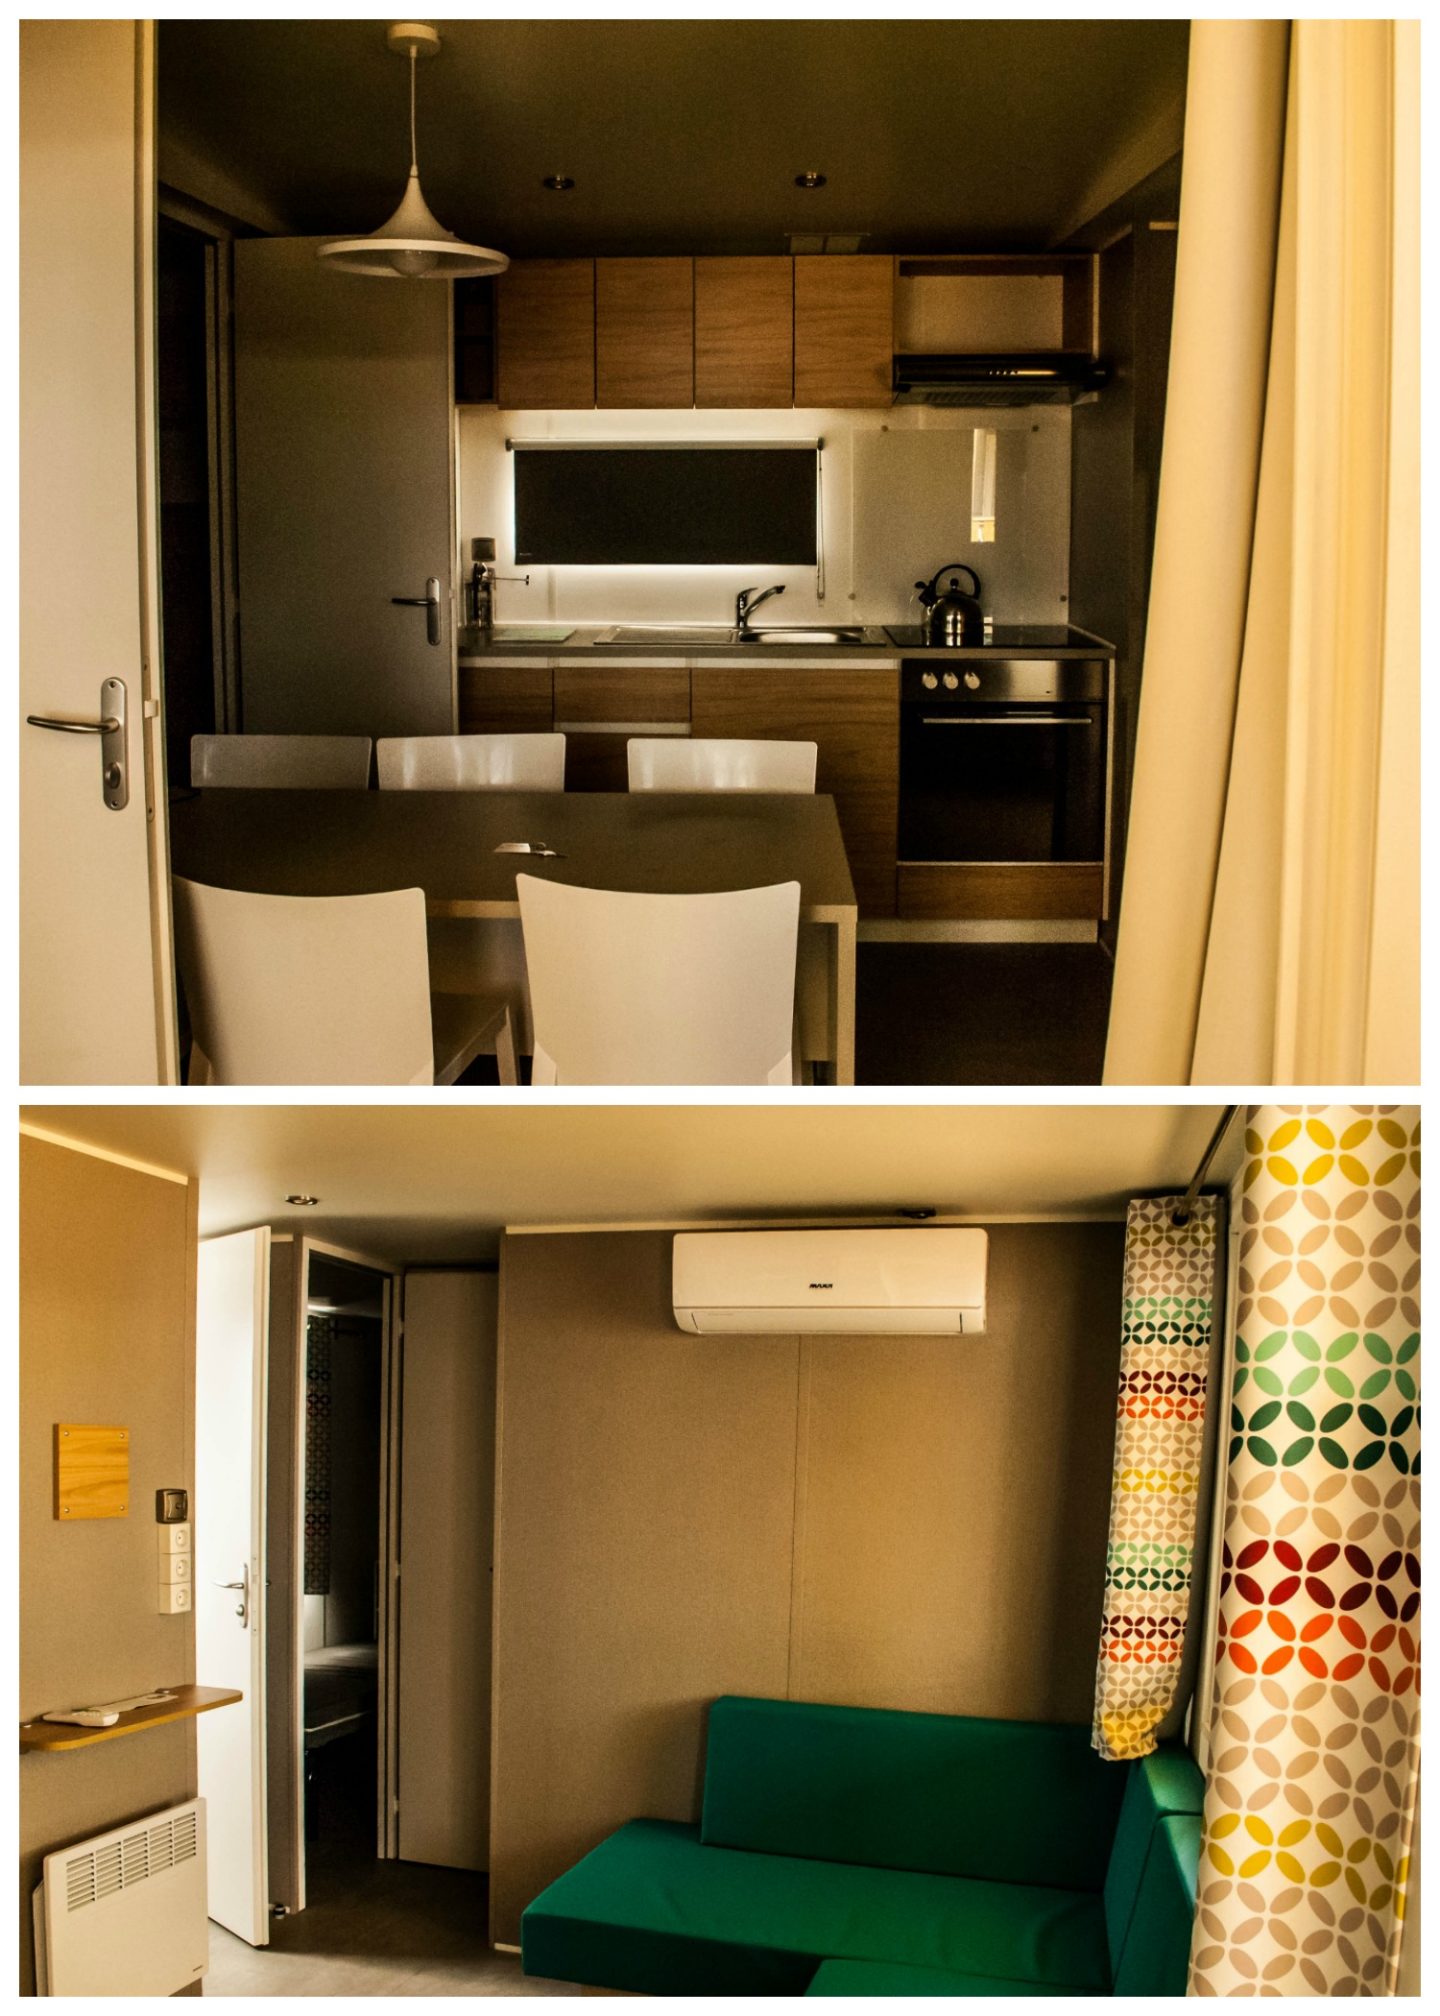 The interior of our Union Lido mobile home was very modern